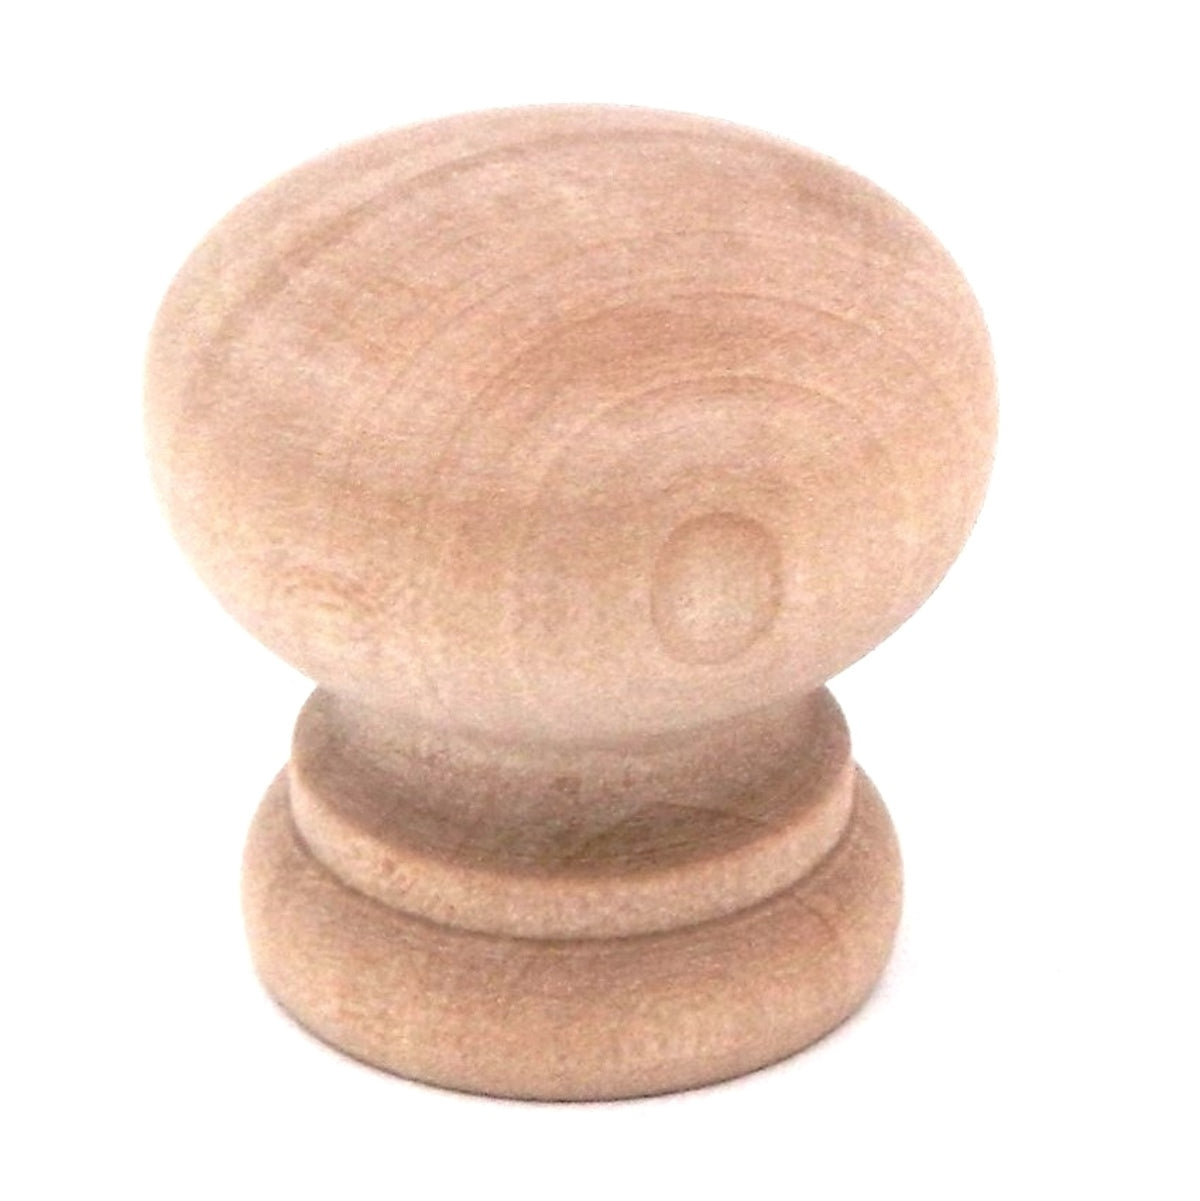 10 Pack Hickory Natural Woodcraft P684-UW Unfinished Wood 1 1/4" Furniture Knobs